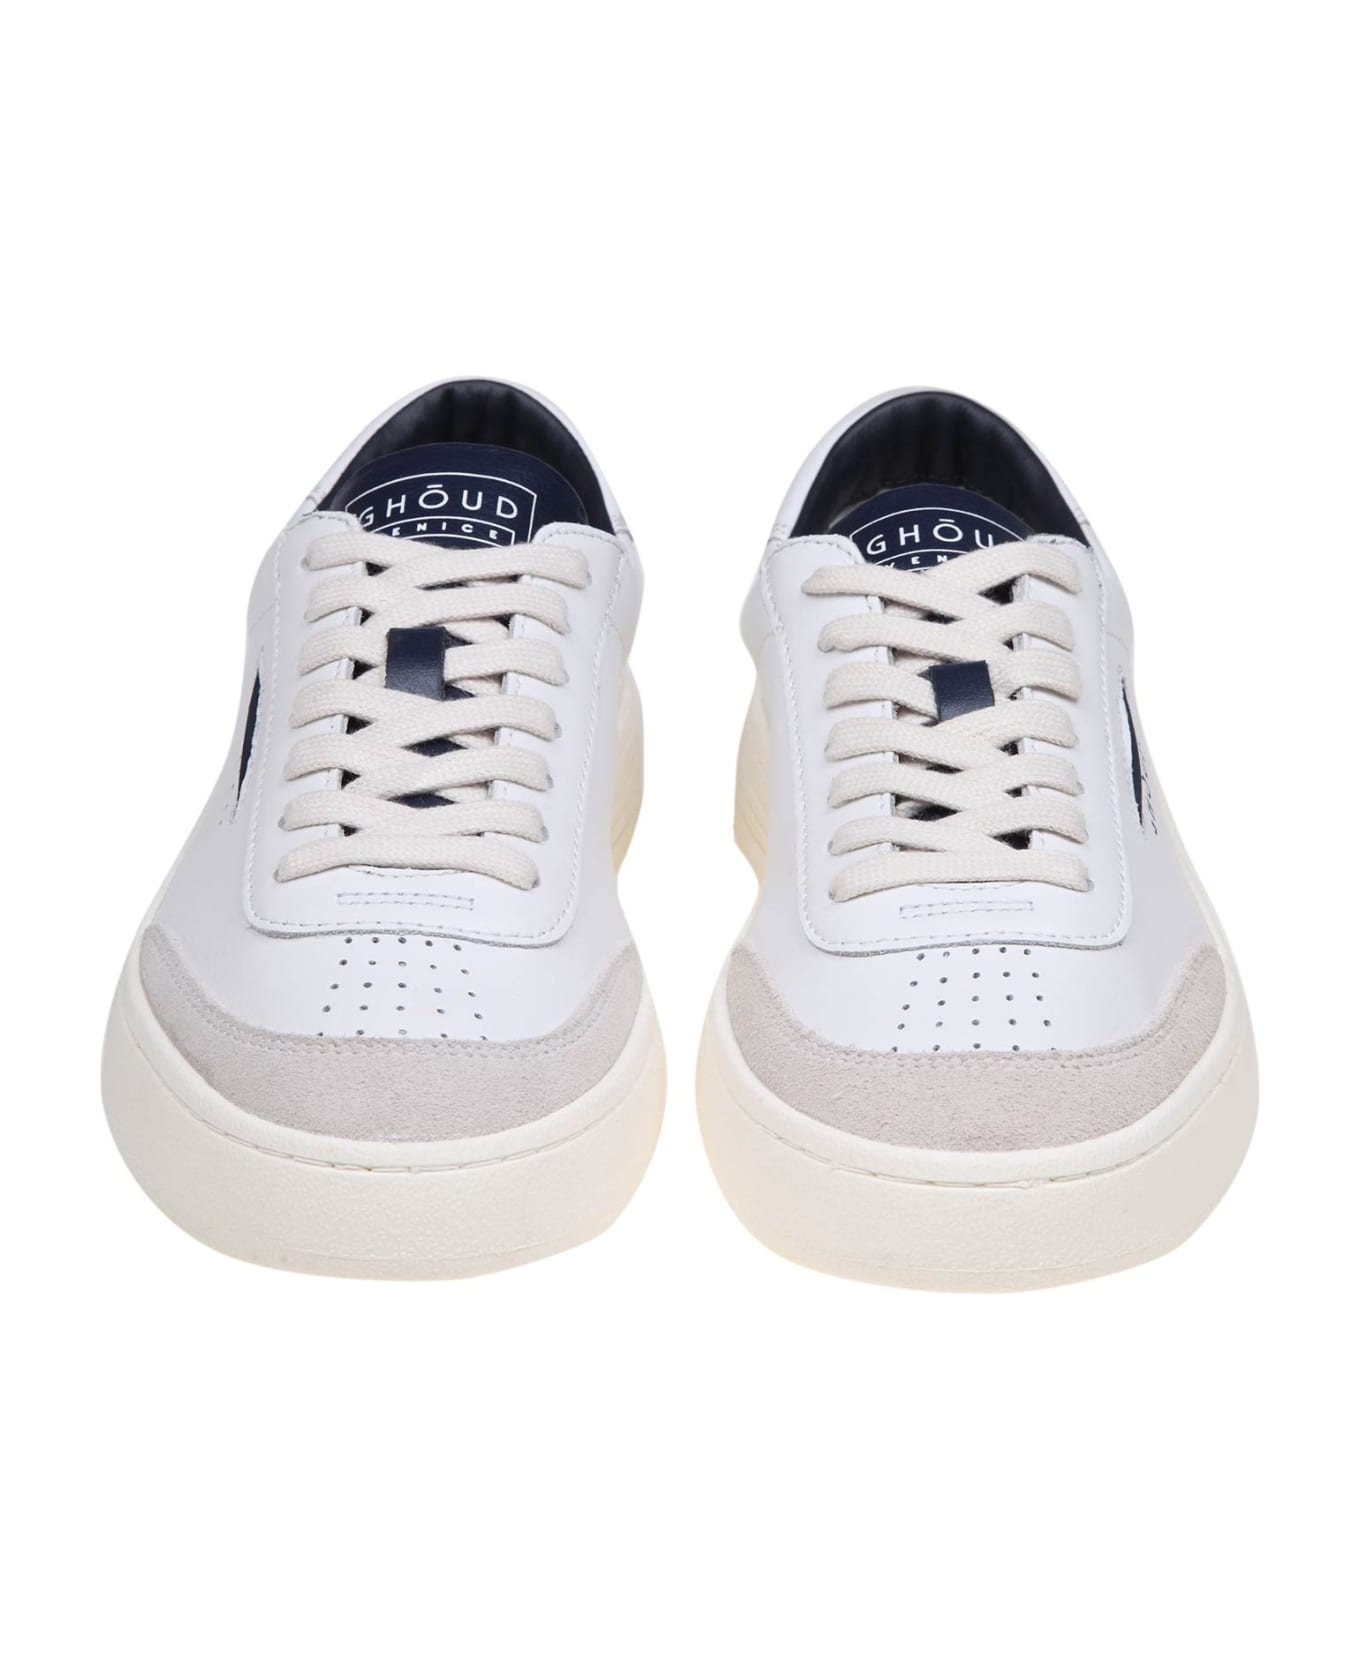 GHOUD Lido Low Sneakers In White/blue Leather And Suede - LEAT/SUEDE WHT/BLUE